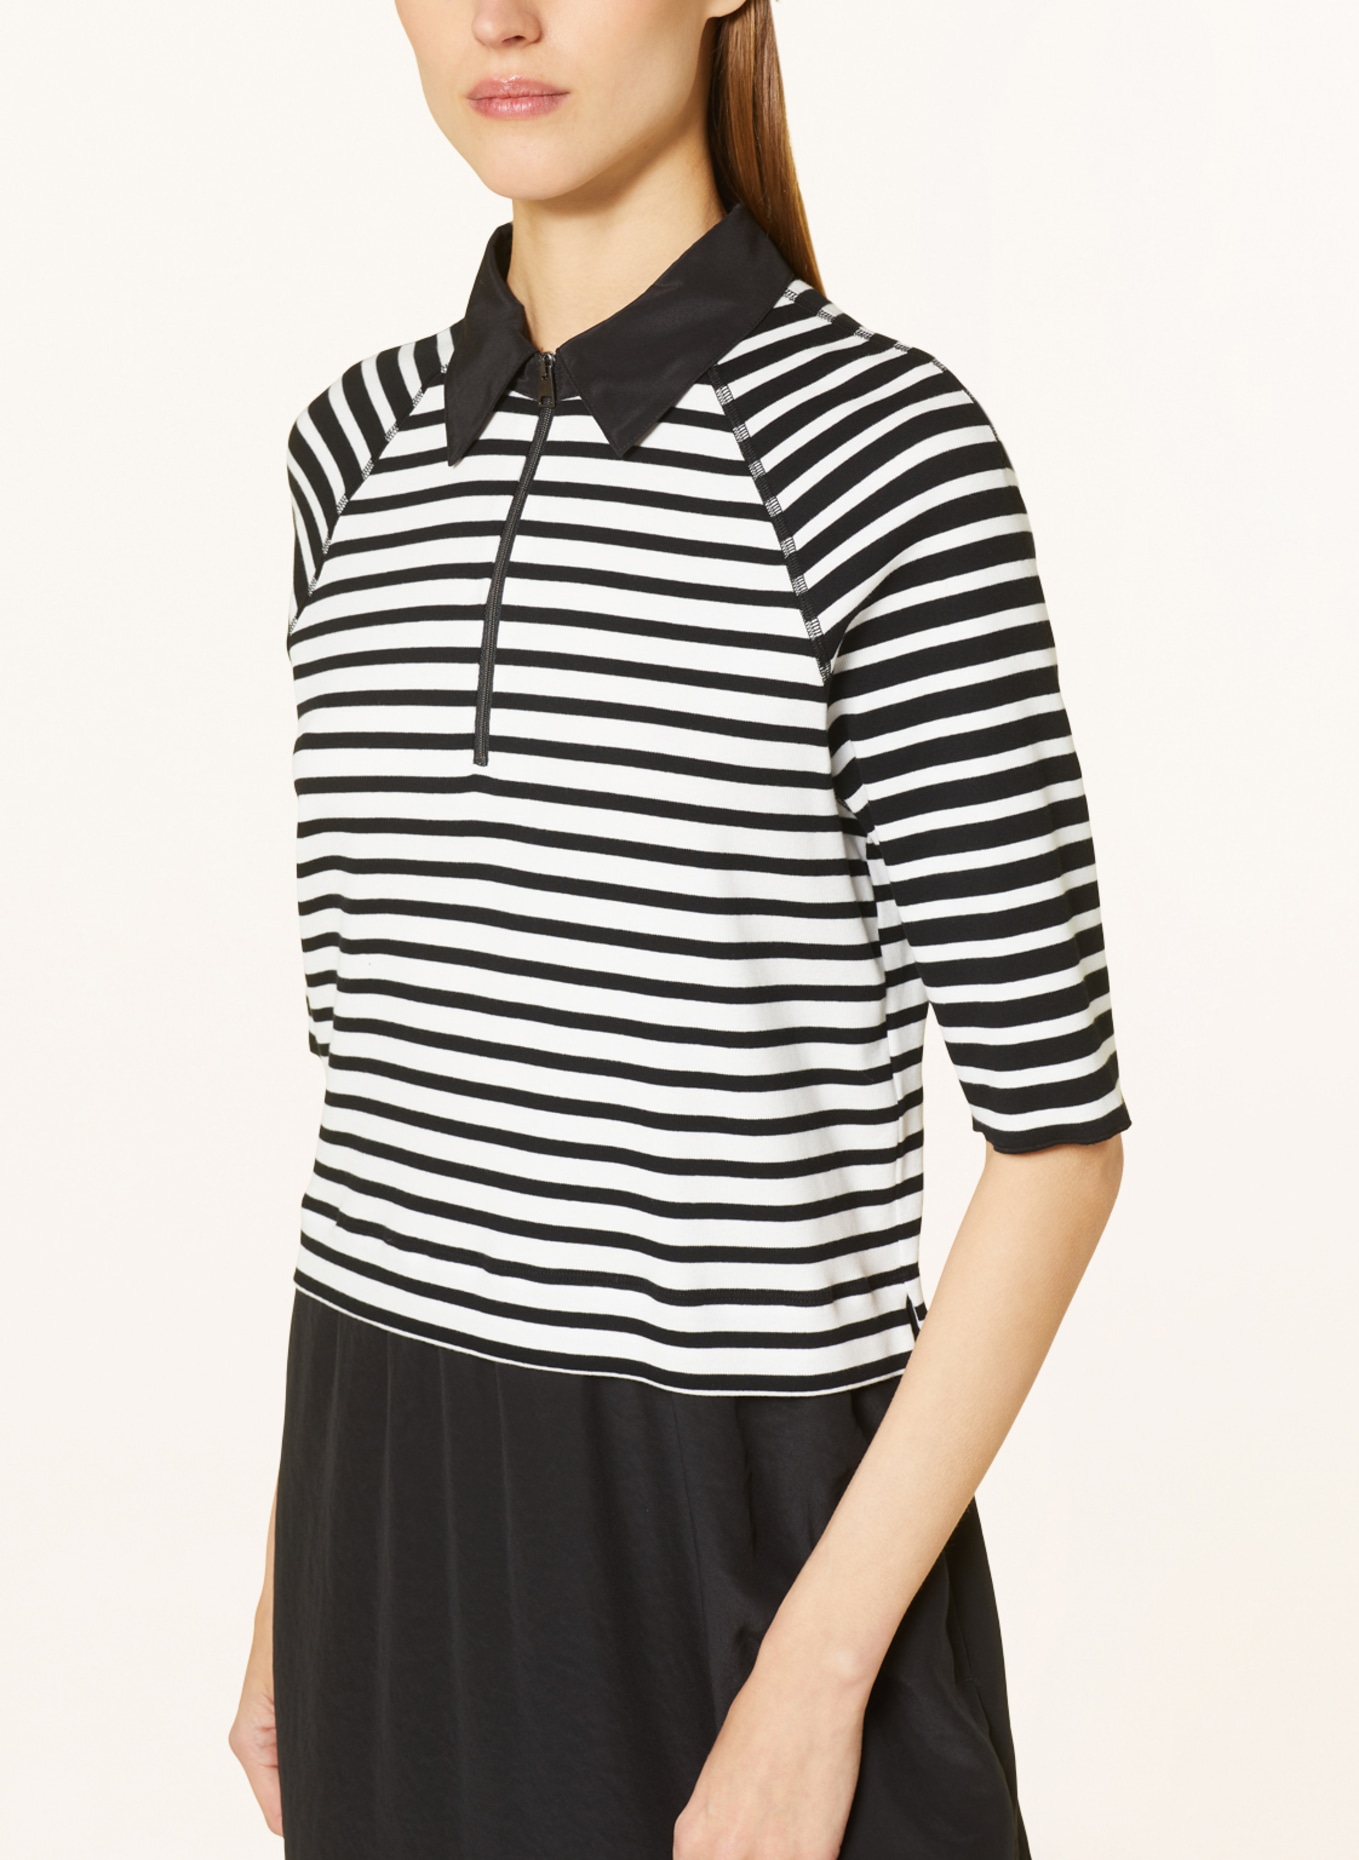 MARC CAIN Jersey polo dress in mixed materials, Color: 910 black and white (Image 4)